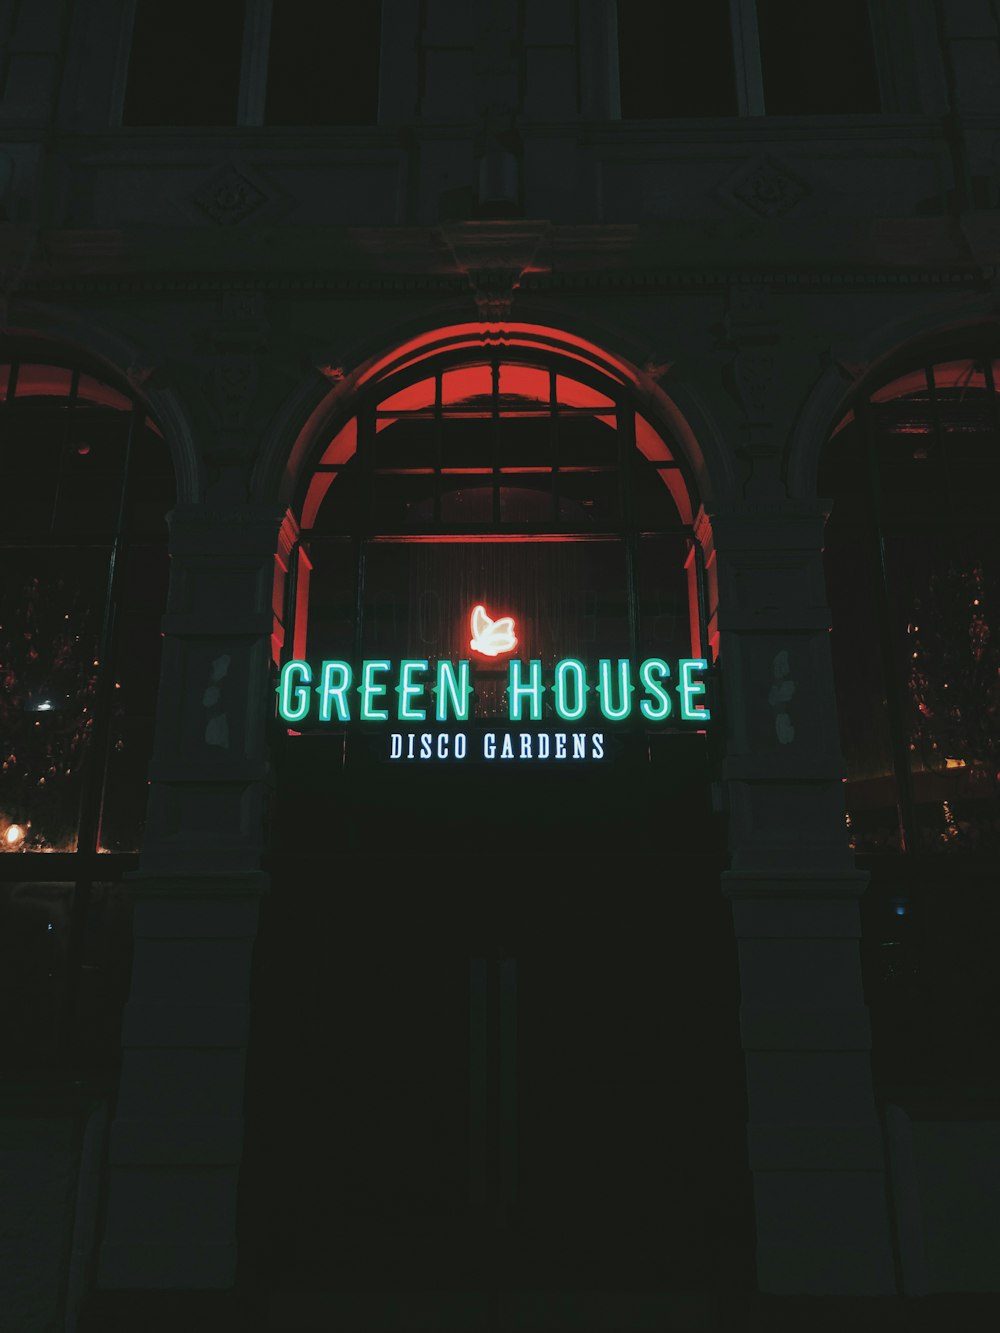 Green House disco gardens sign during night time